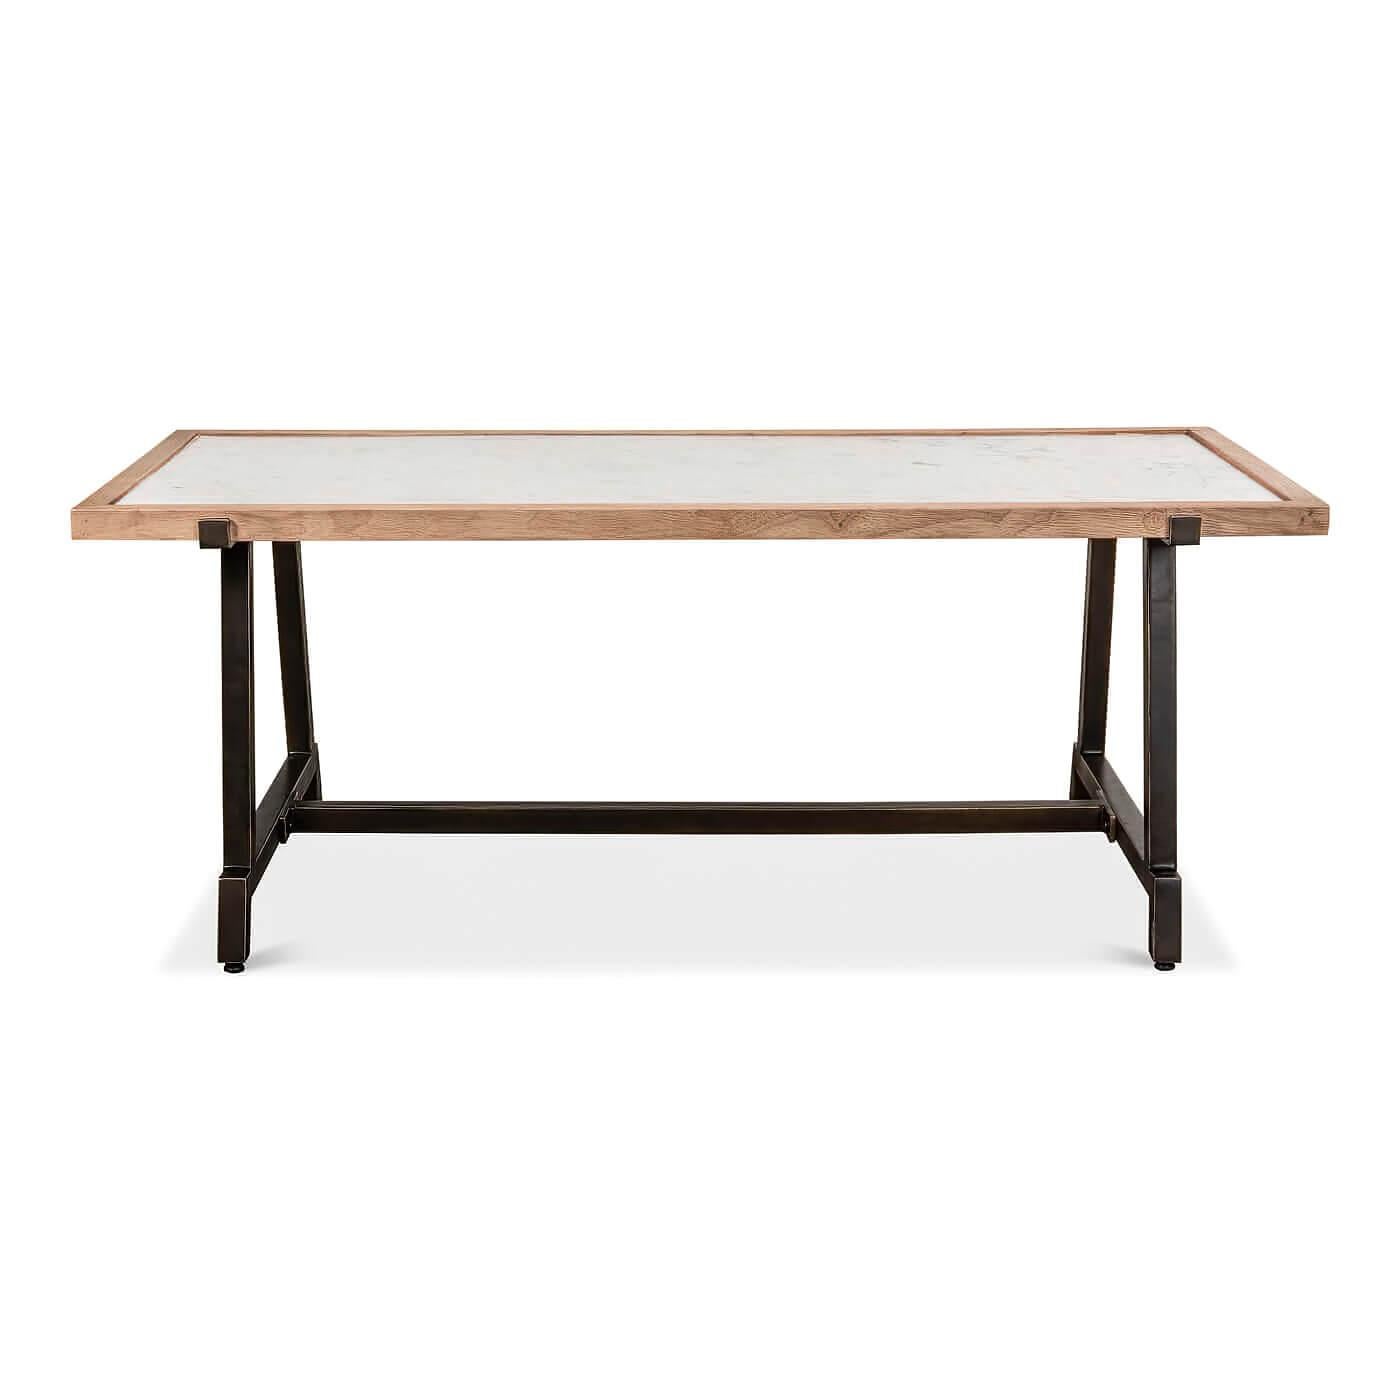 A modern framed marble top and metal base coffee table. The large rectangular white marble top is framed in a light stained wood frame. The tabletop rests on a metal base in an antique black finish.

This piece has a modern meets Industrial look